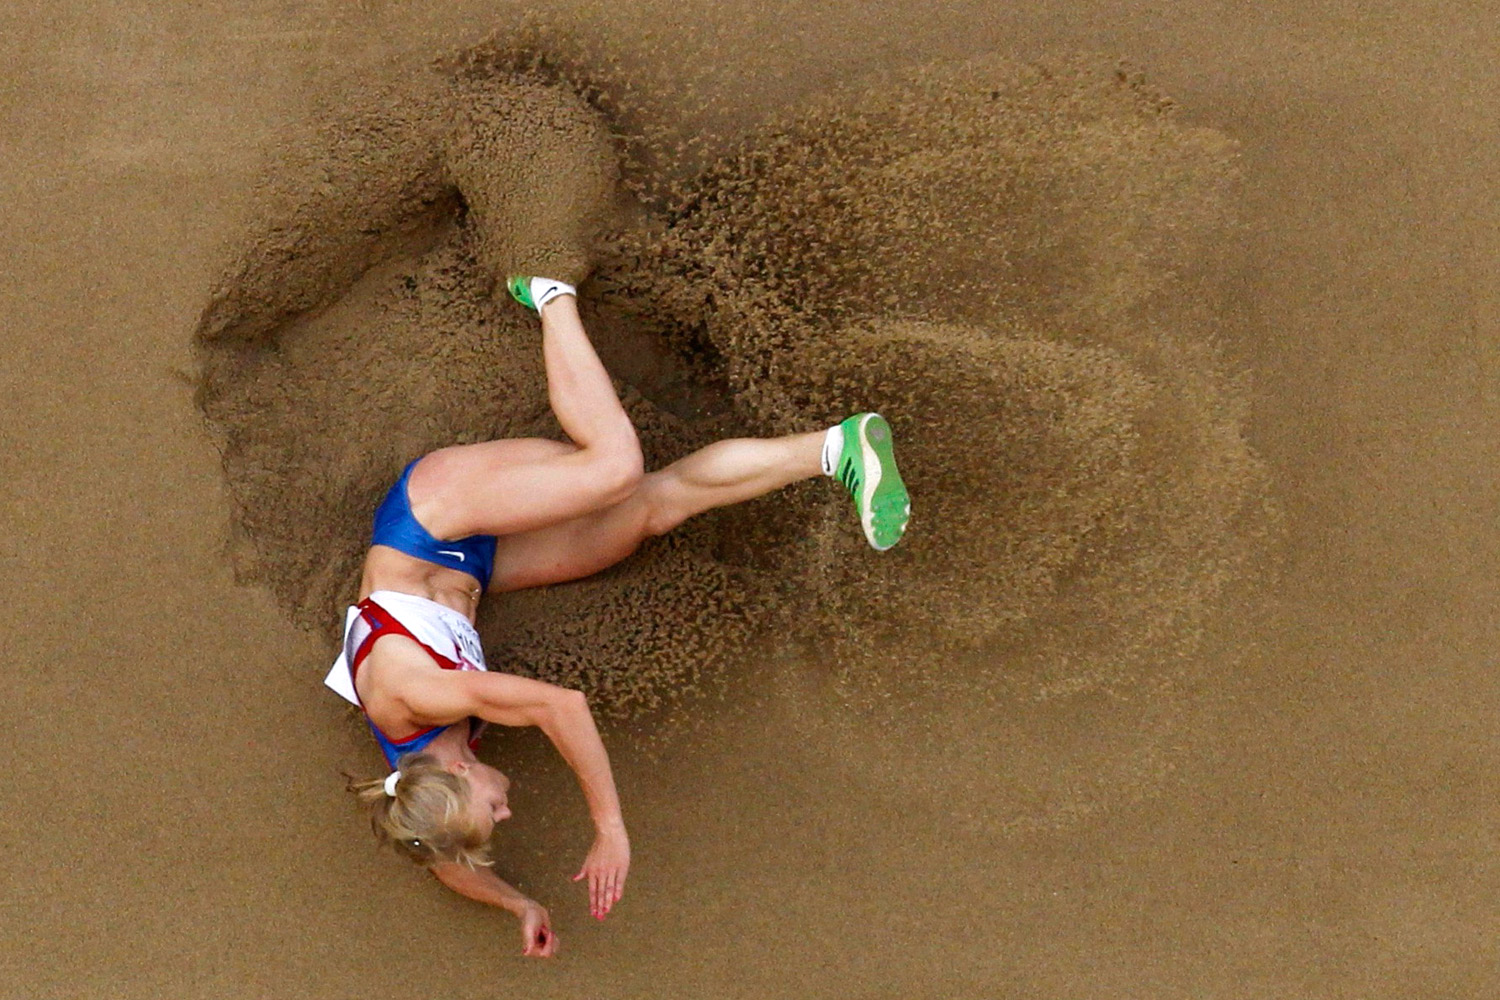 Anna Bogdanova of Russia competes during the long jump event of the heptathlon at the IAAF World Championships in Daegu, South Korea, August 30, 2011.